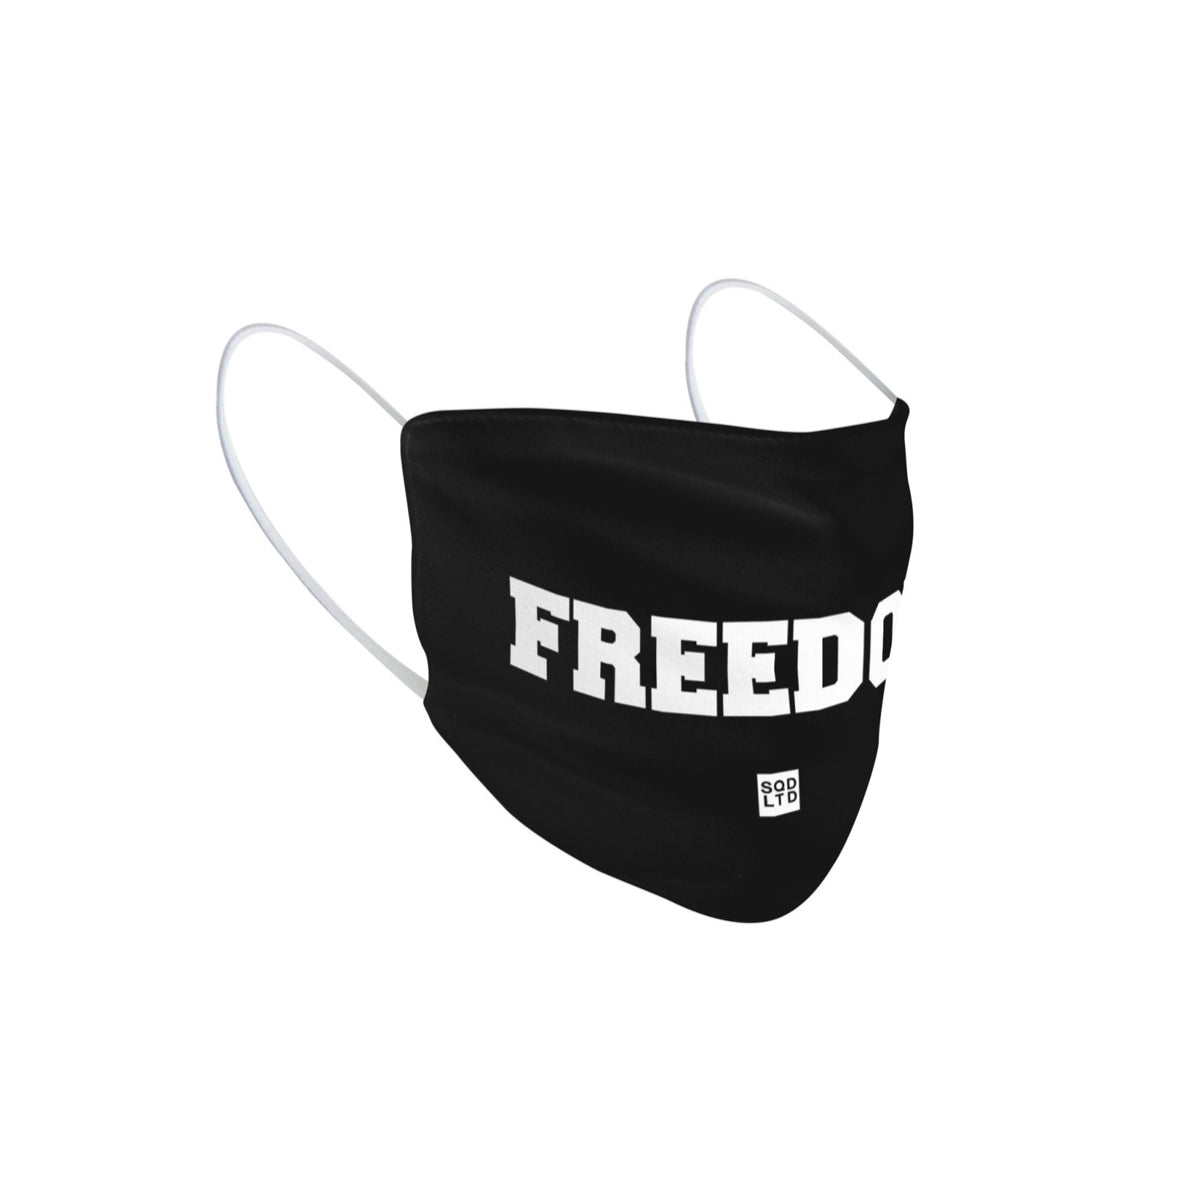 Freedom Face Mask WL by Squared Limited